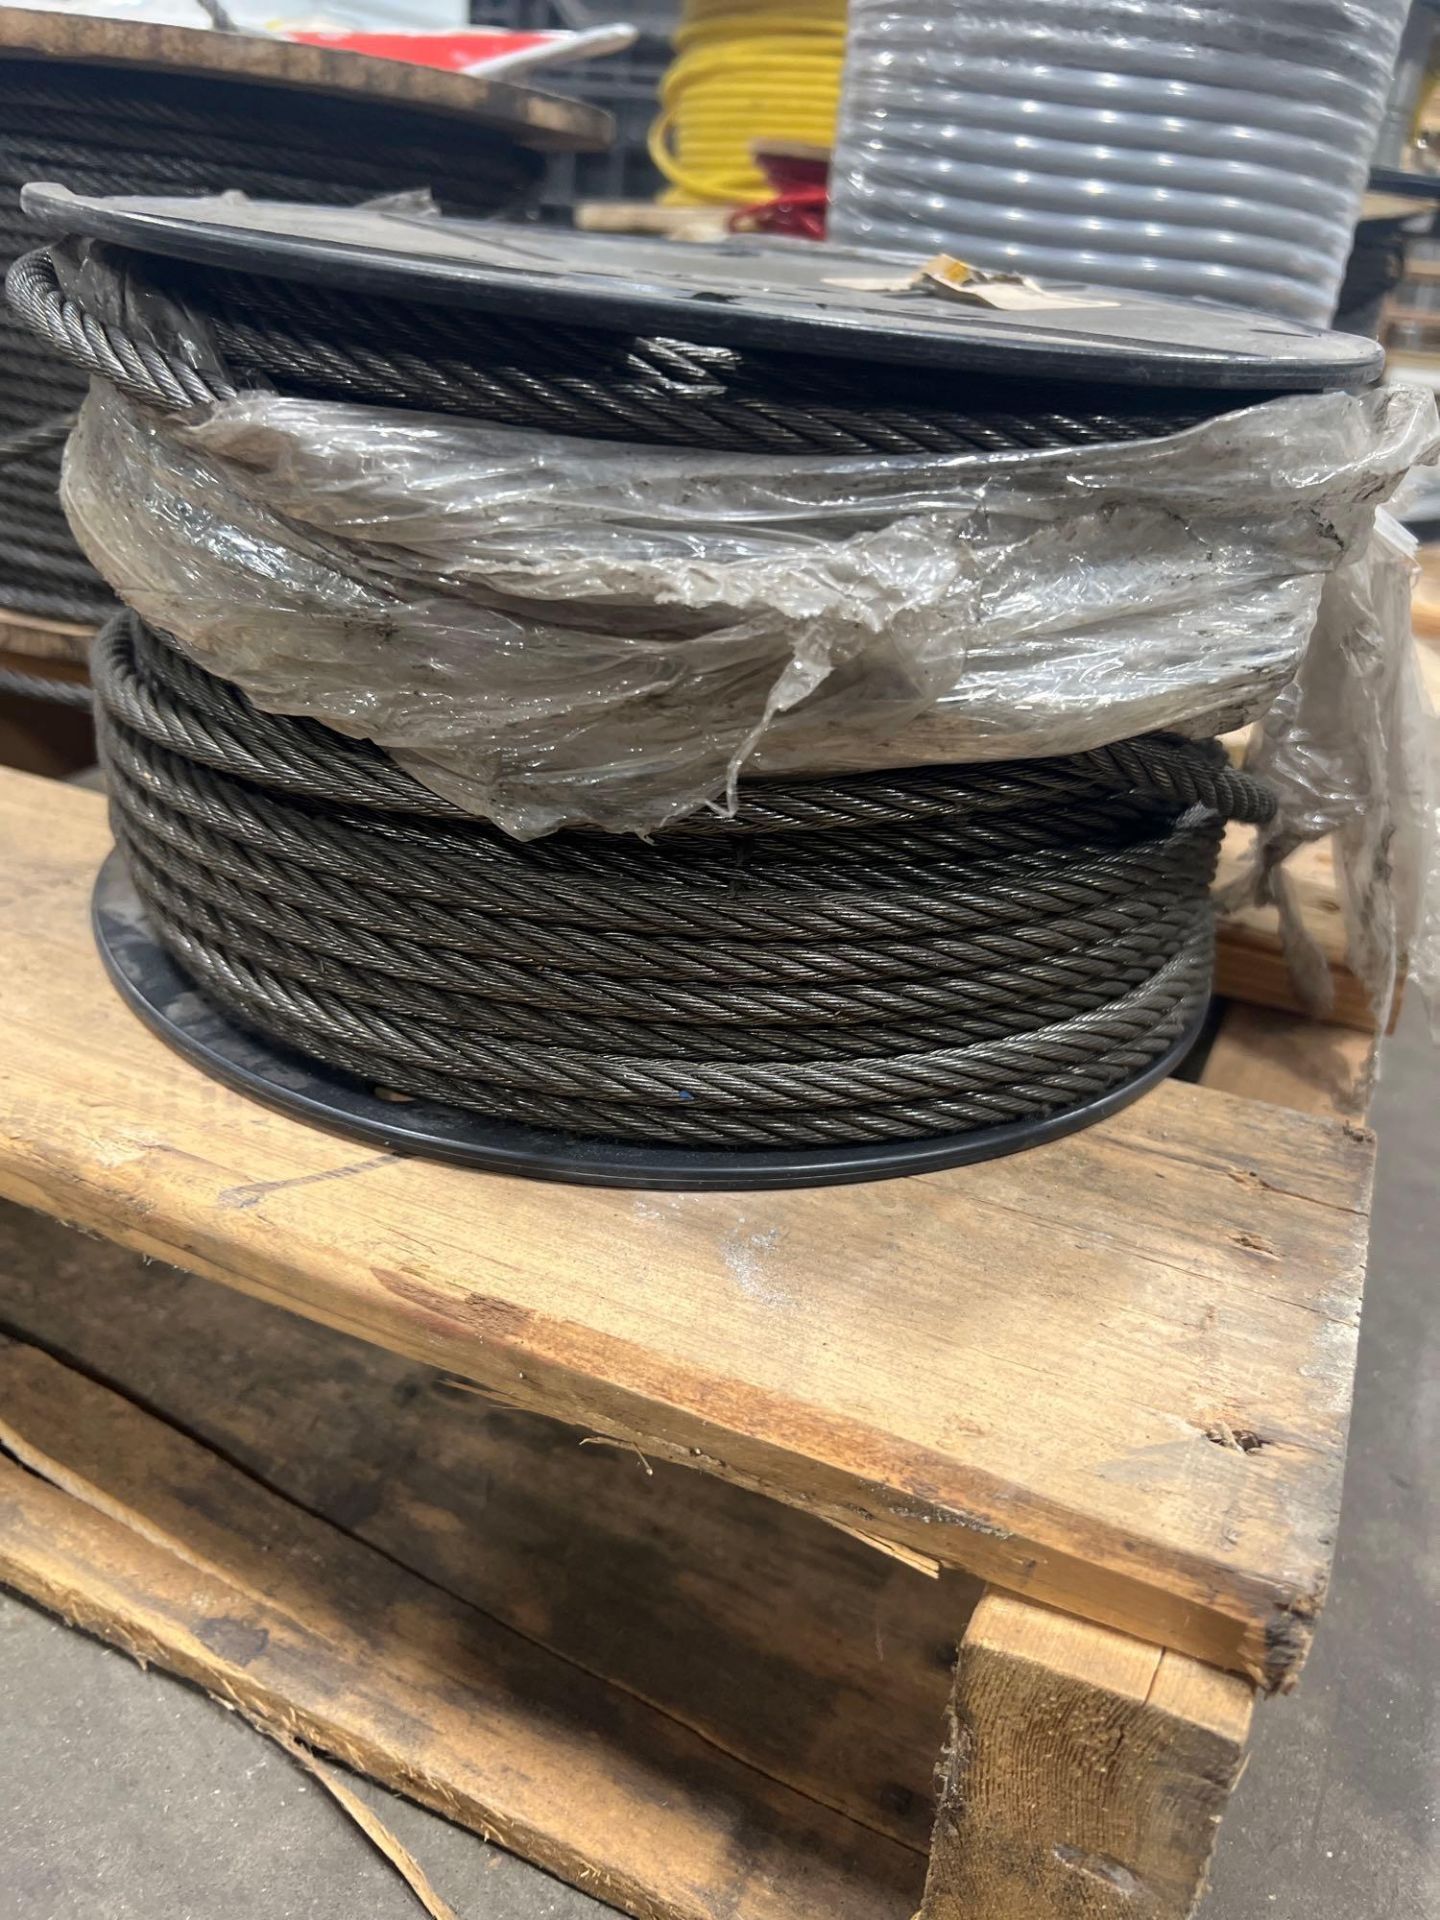 pallet of cable spools - Image 8 of 9